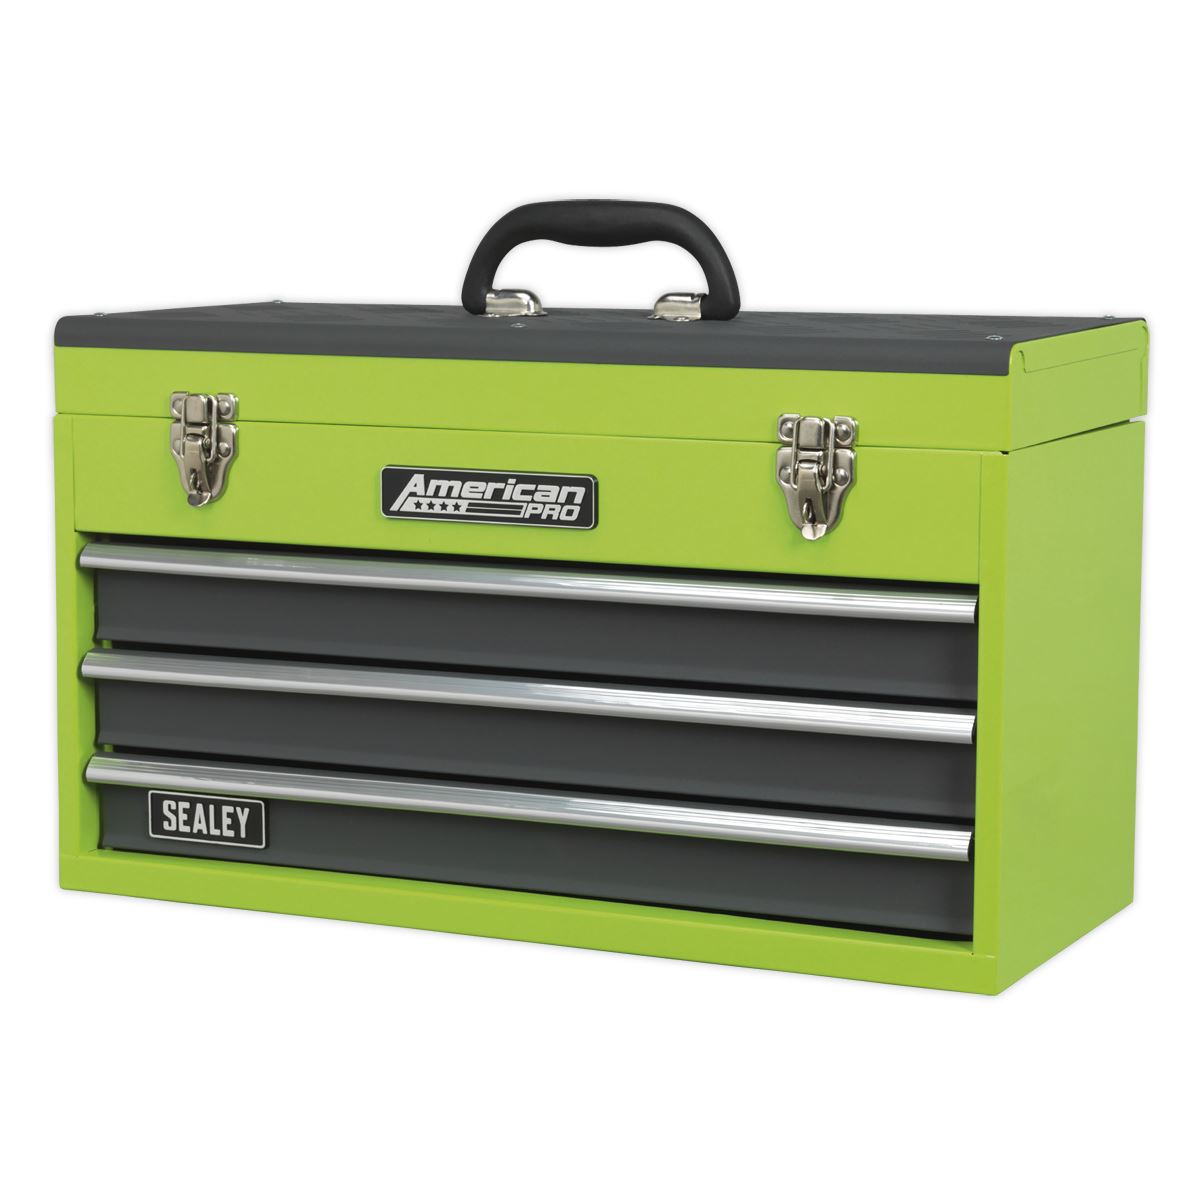 Sealey American Pro Tool Chest 3 Drawer Portable with Ball-Bearing Slides - Green/Grey